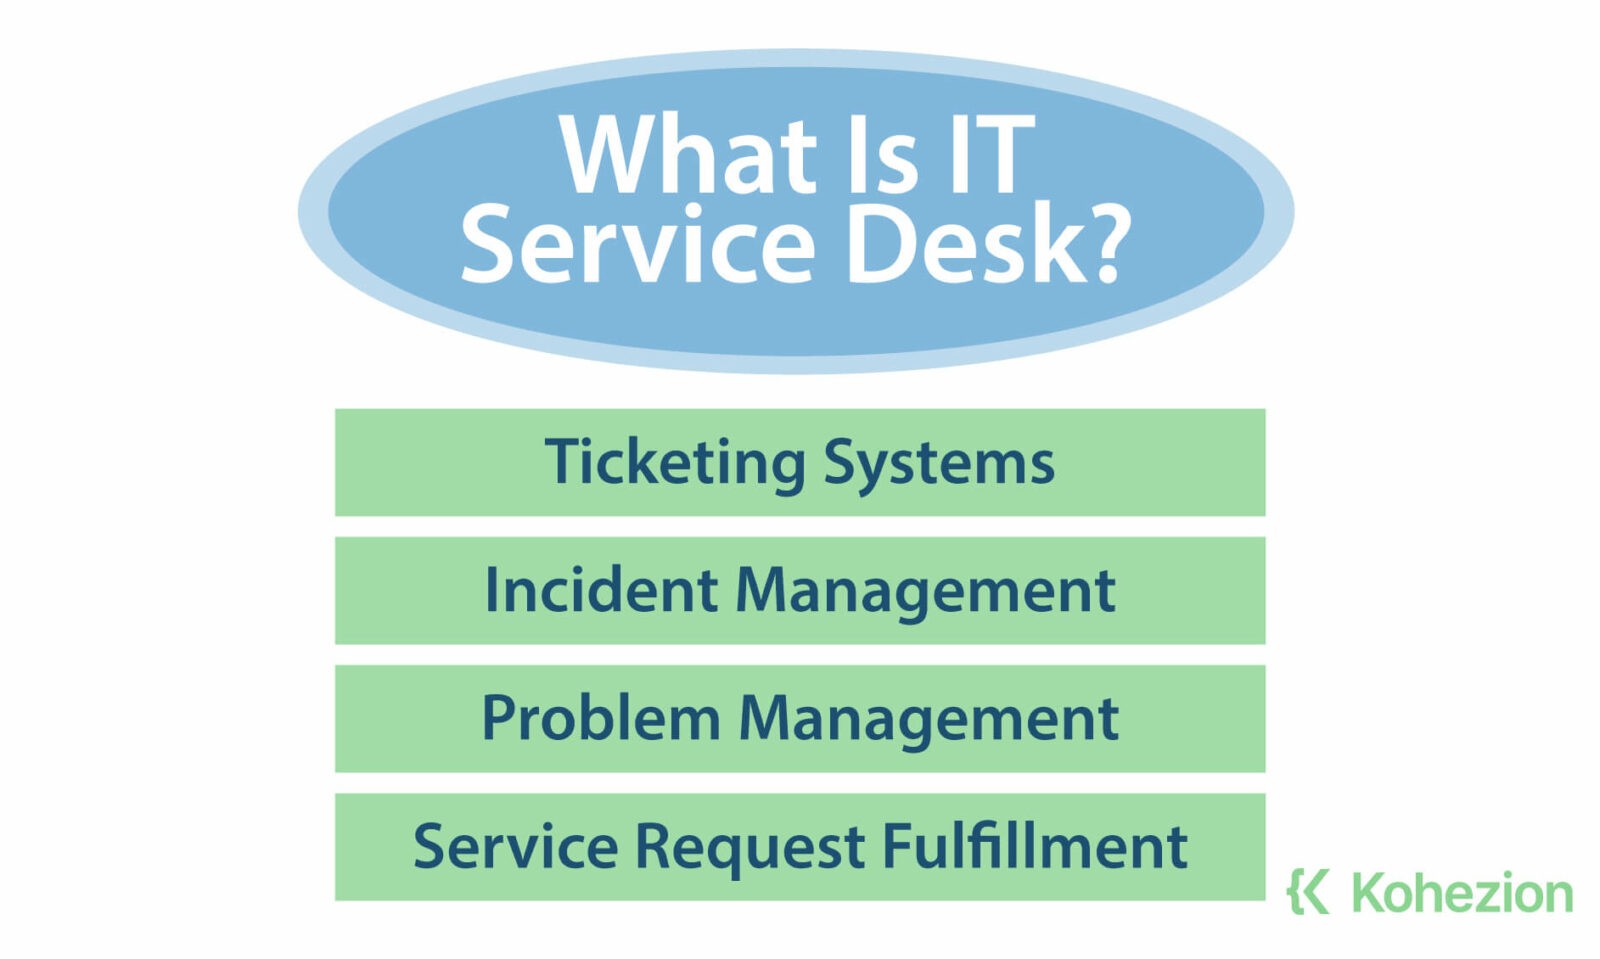 Page-1.8-What-Is-IT-Service-Desk-- (1)